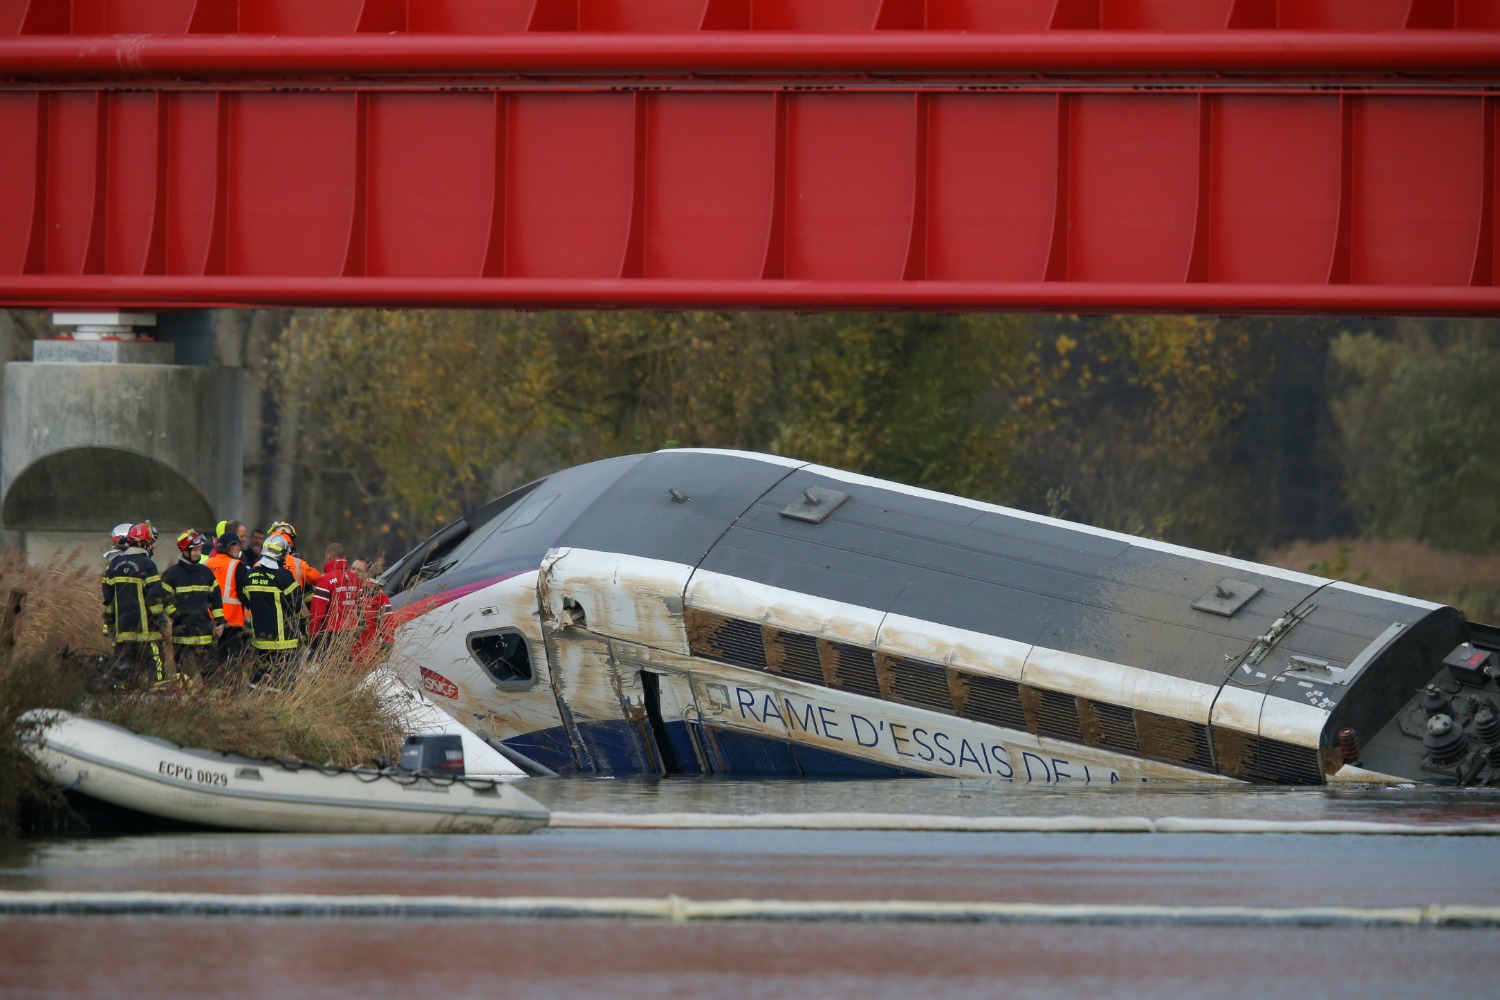 French high-speed train derailed due to driver error